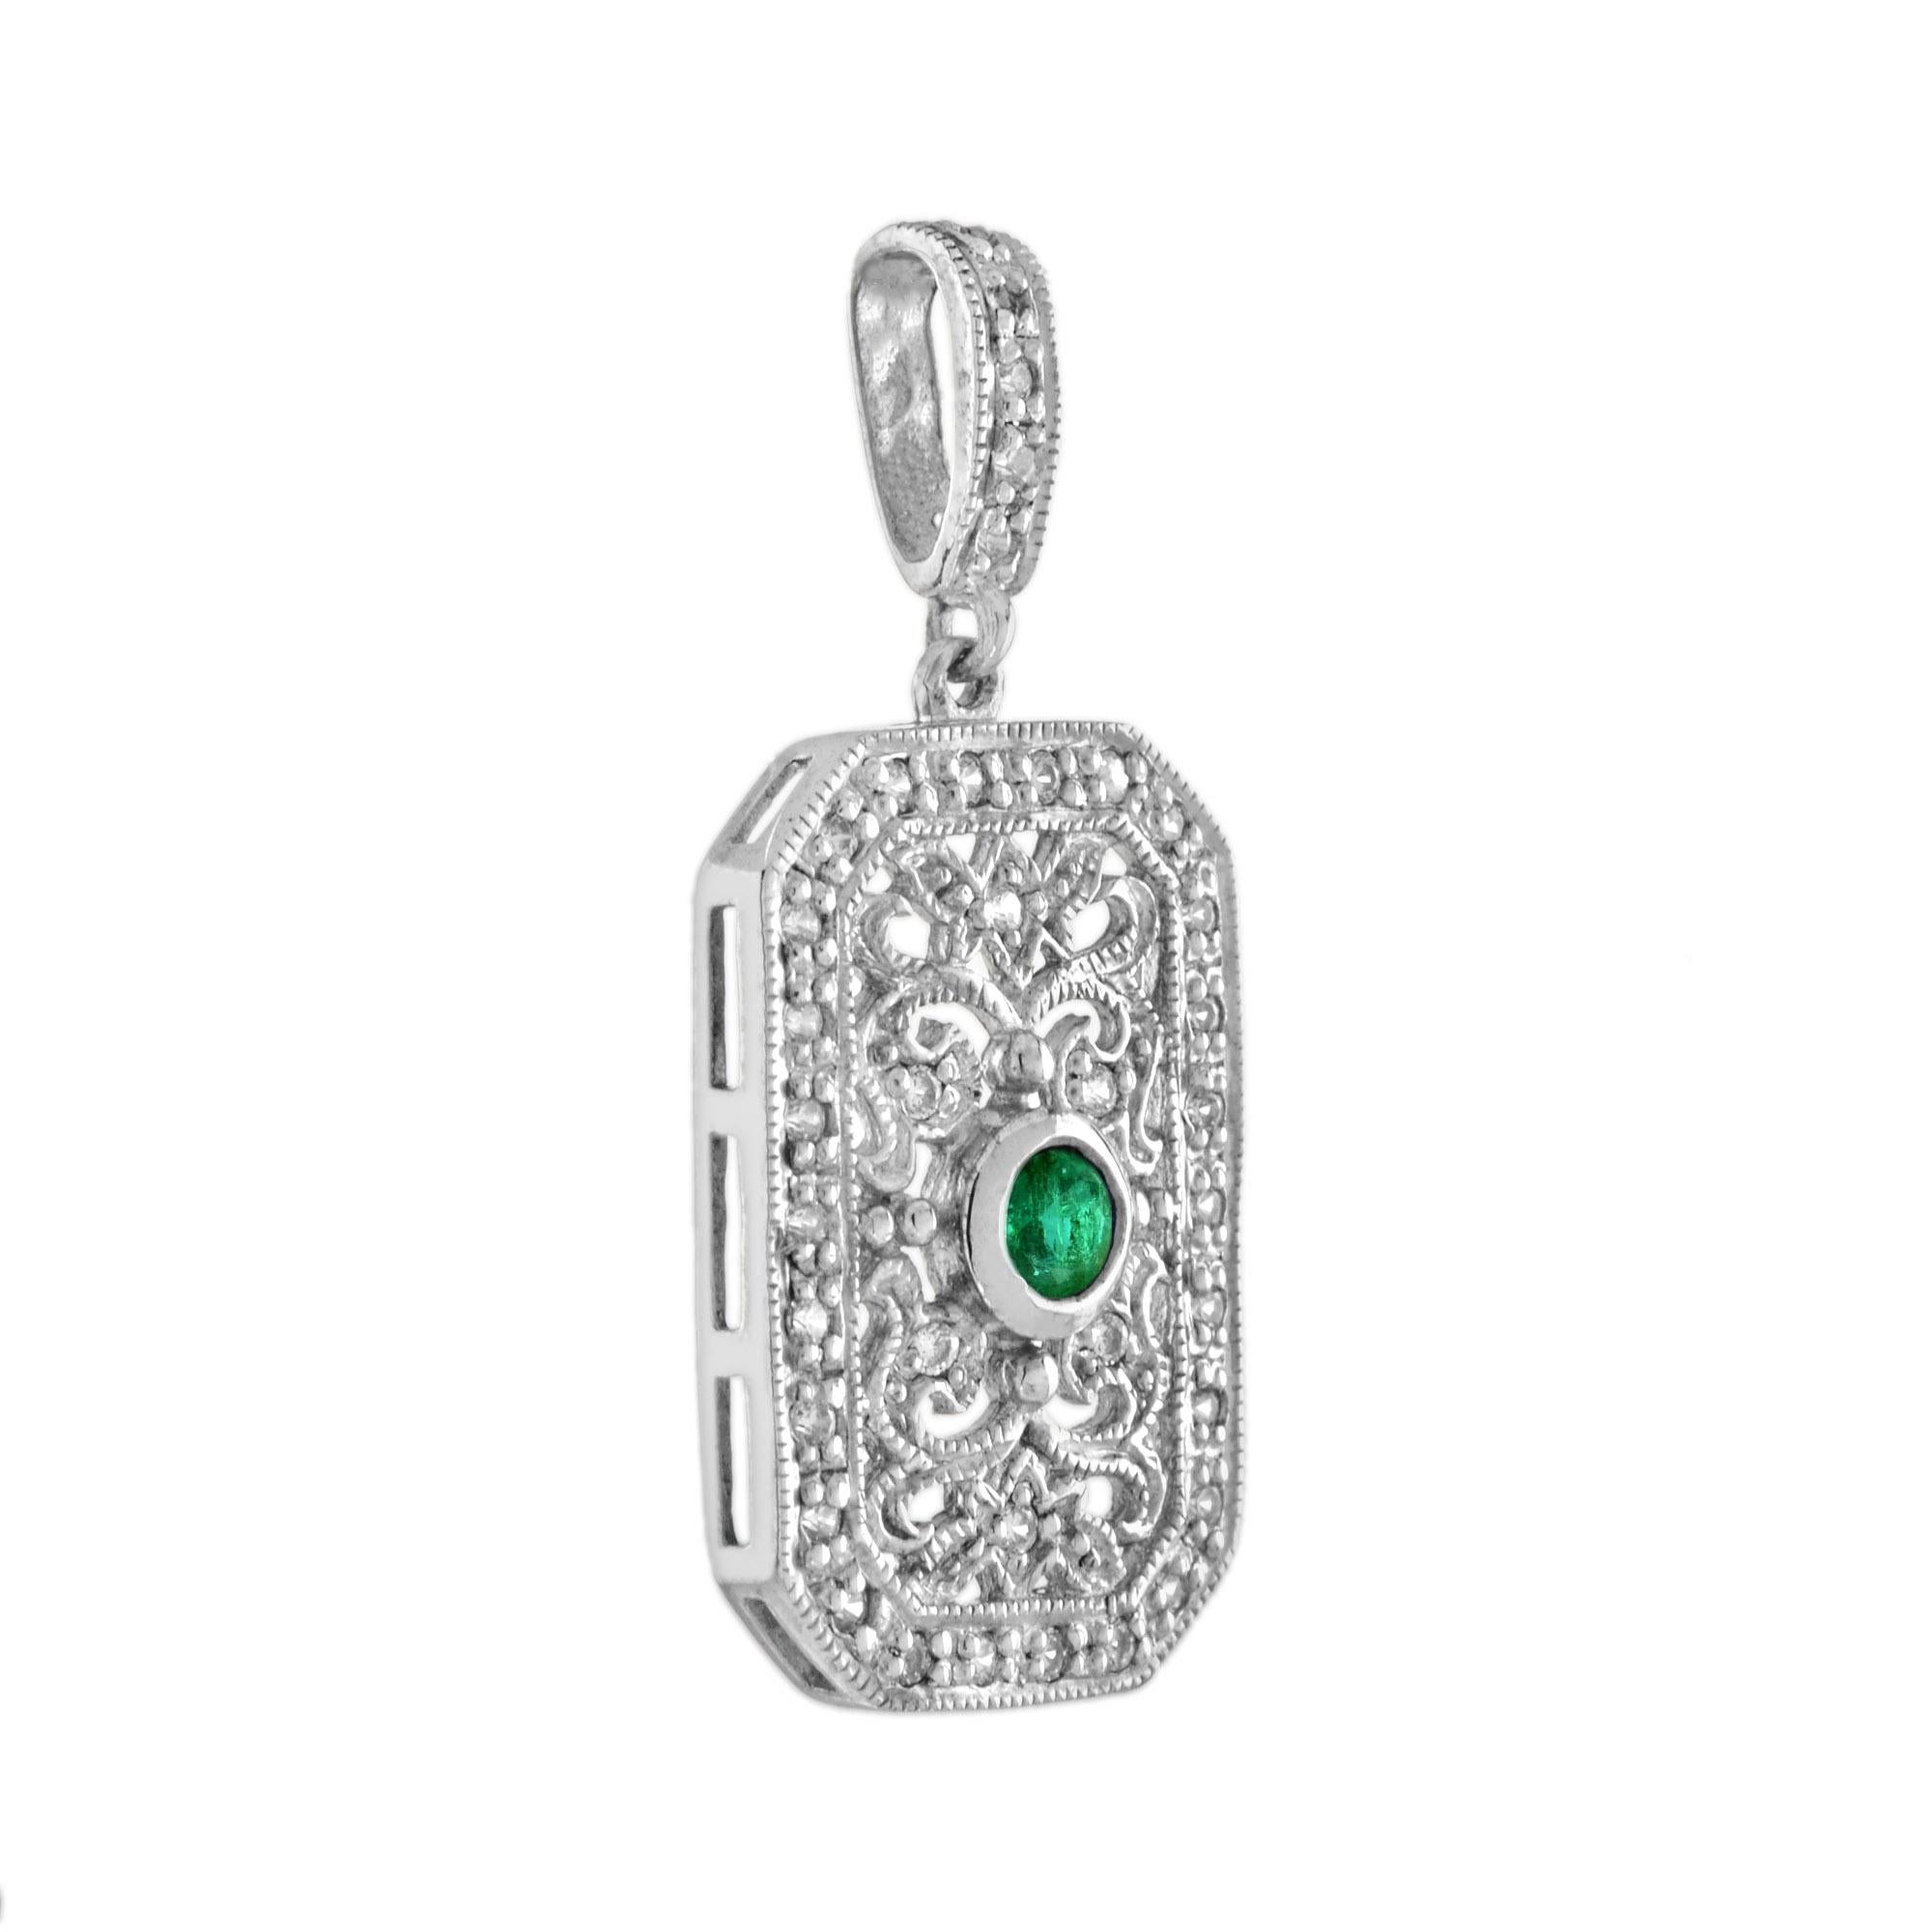 Featuring a 0.09 carat emerald at the center and an ornate, vintage inspired design, this pendant is fit for any outfit. The colorful center stone is accented by sparkling round cut white diamonds that total 0.19 carats set on a 14k white gold